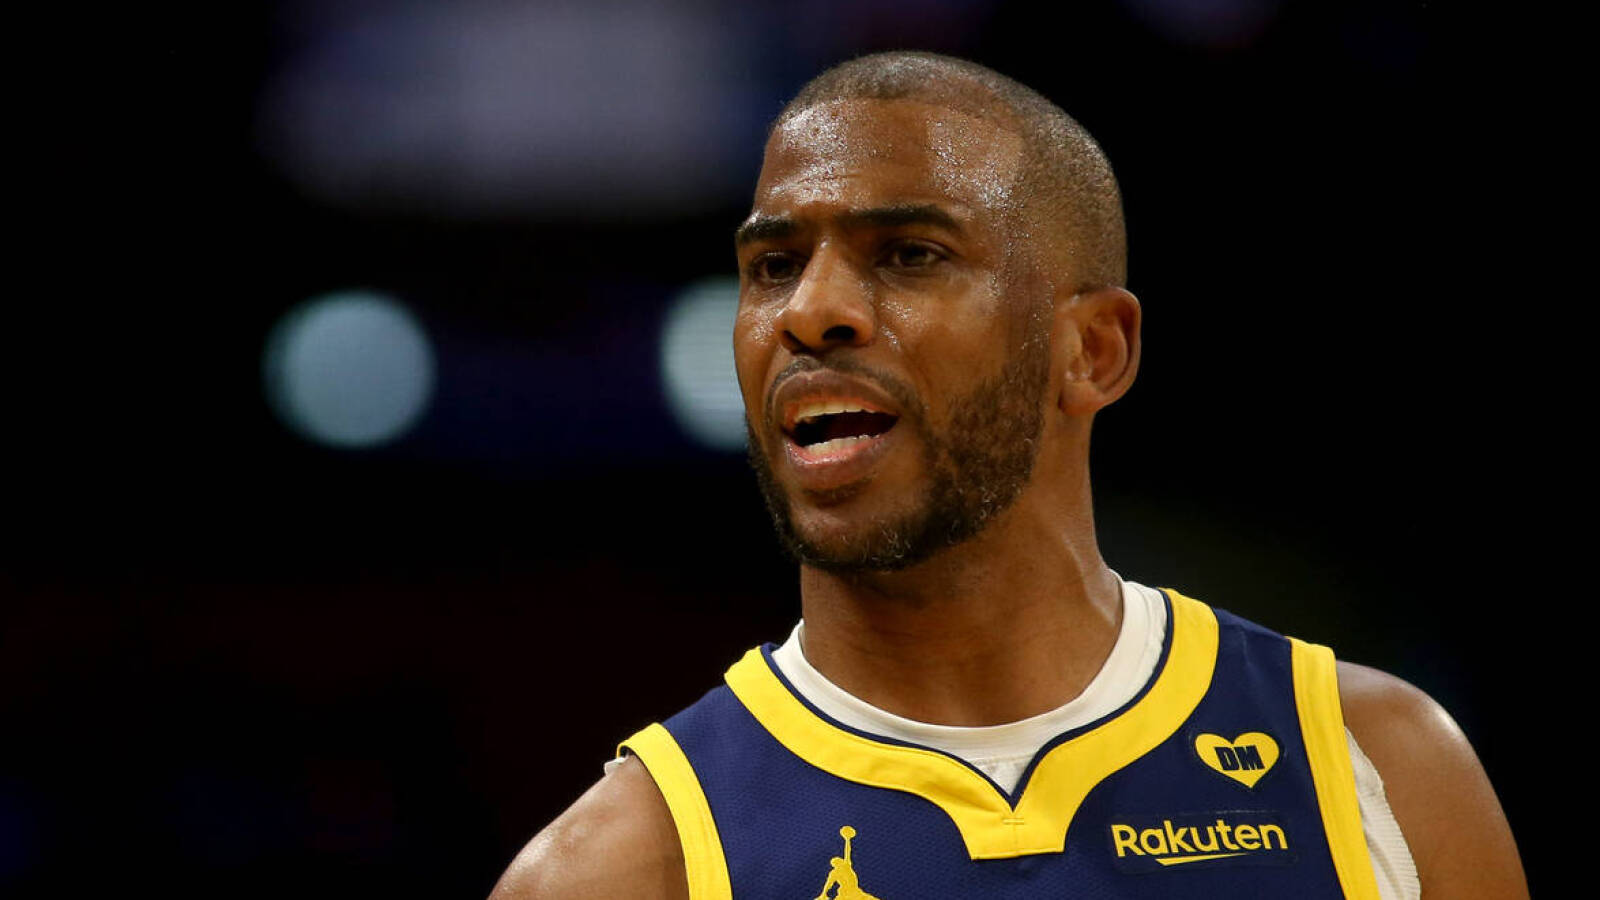 Chris Paul took hilarious jab at rival ref before latest ejection